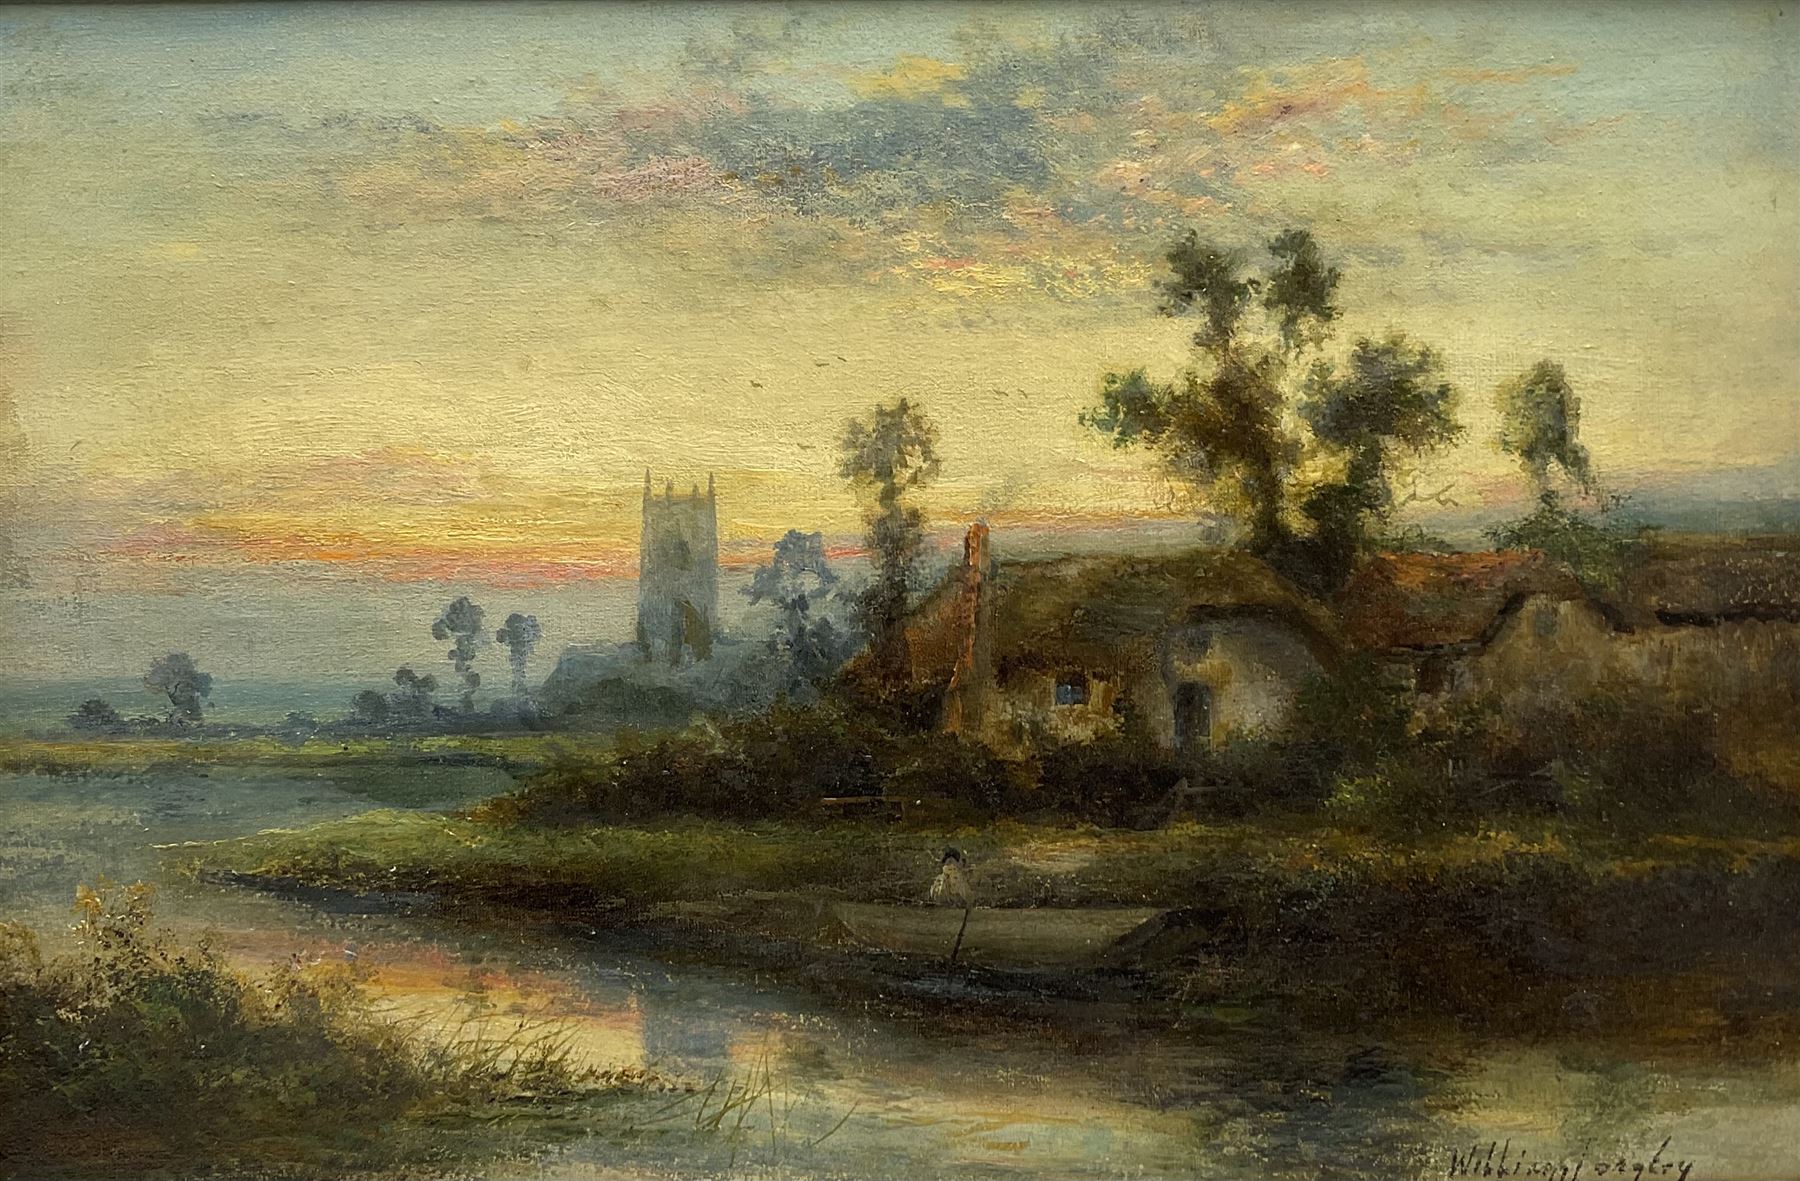 William Langley (British 1852-1922): River Scene with Church and Cottages at Sunset